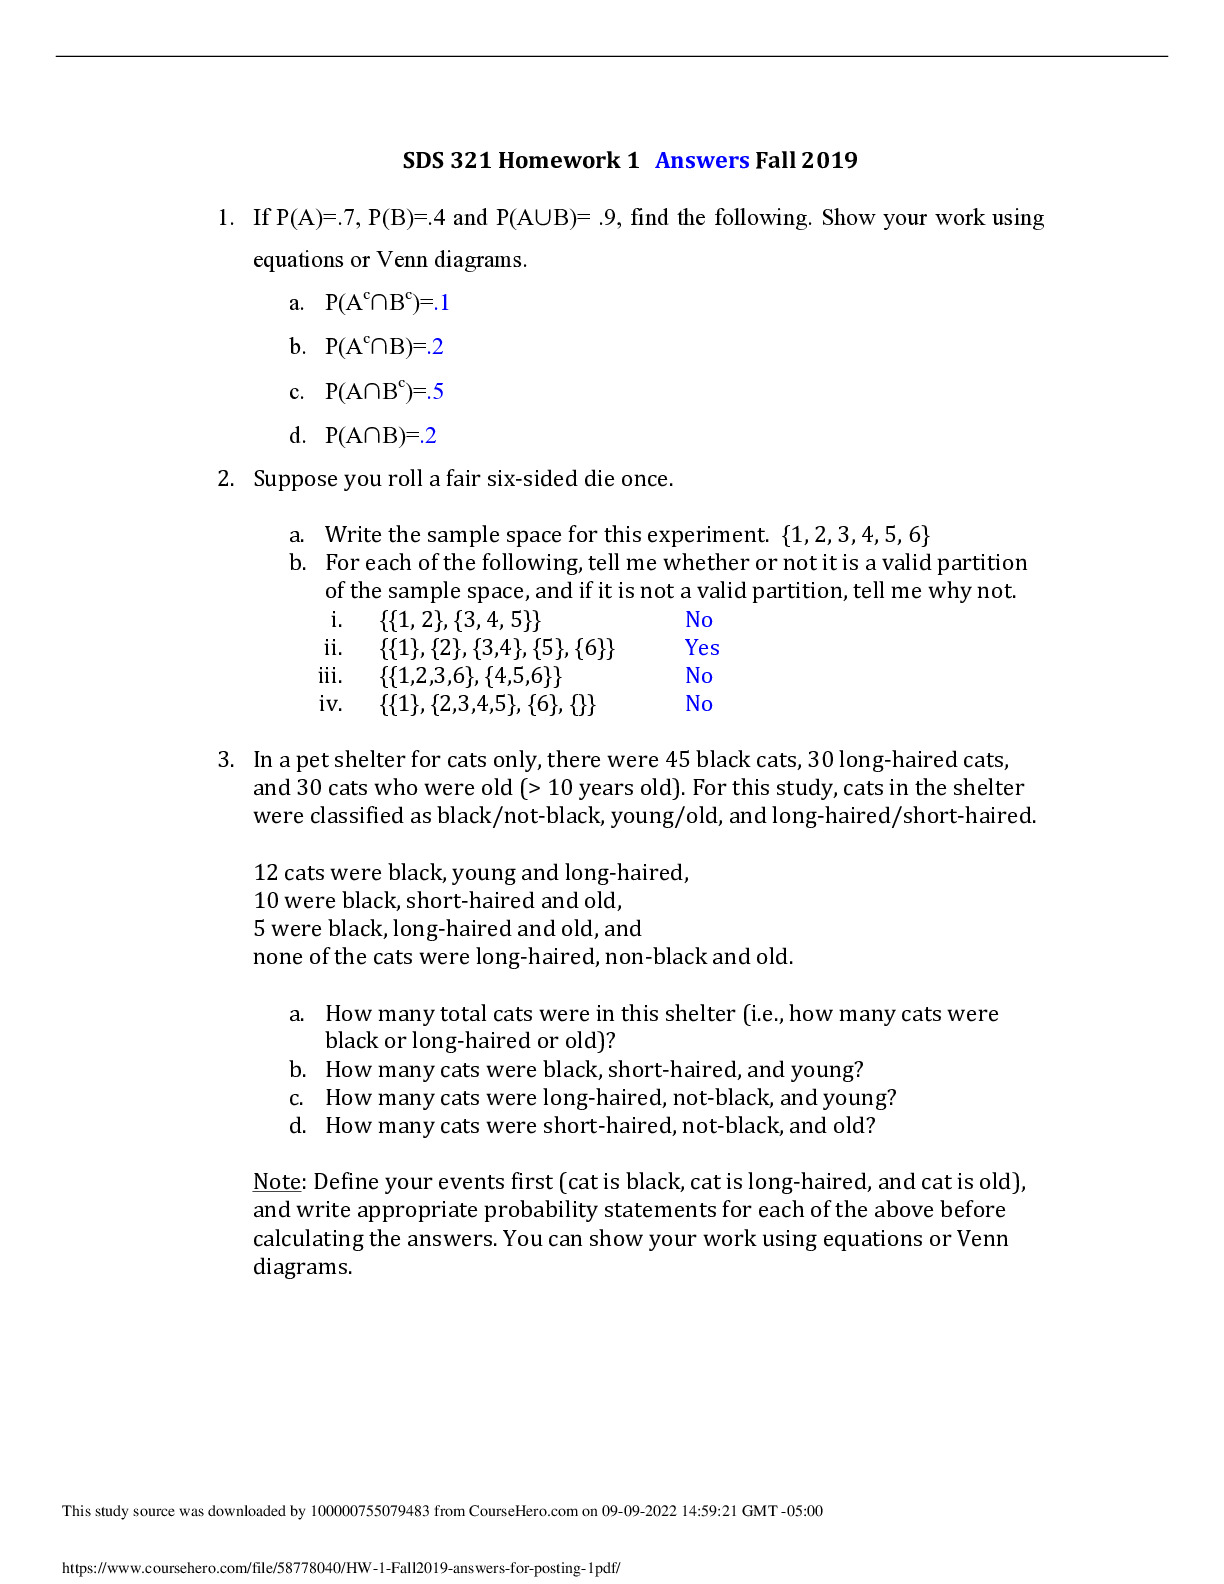 HW_1_Fall2019_answers_for_posting__1_.pdf